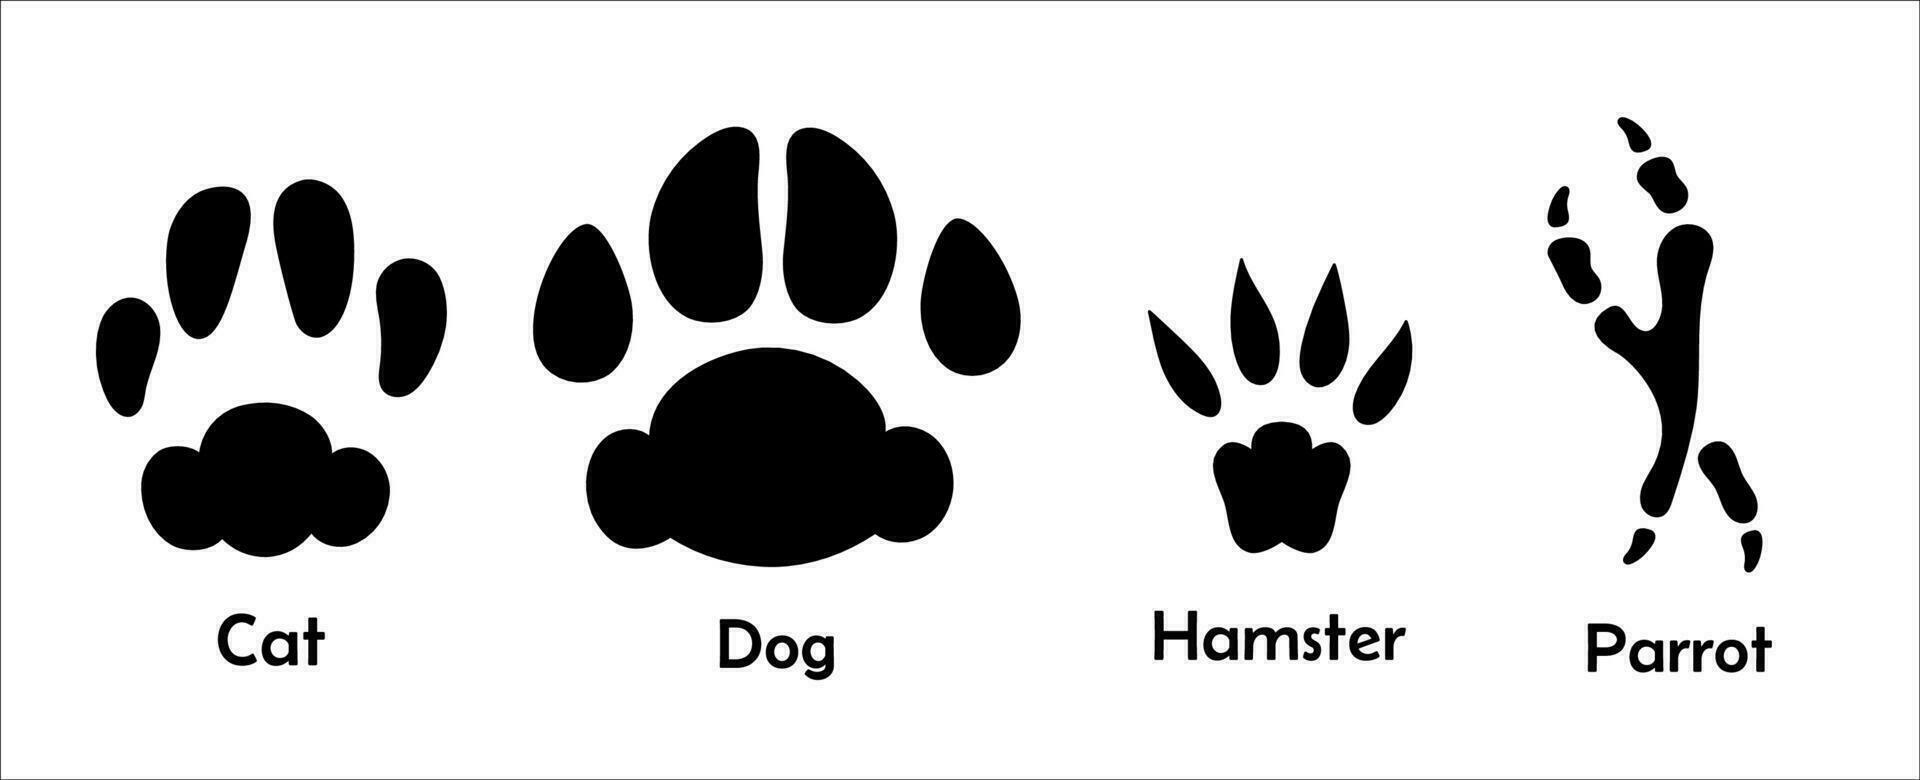 Different pets paw print silhouette set. Cat, dog, parrot and hamster footprint vector illustration. Domestic Animal tracks isolated on white background.